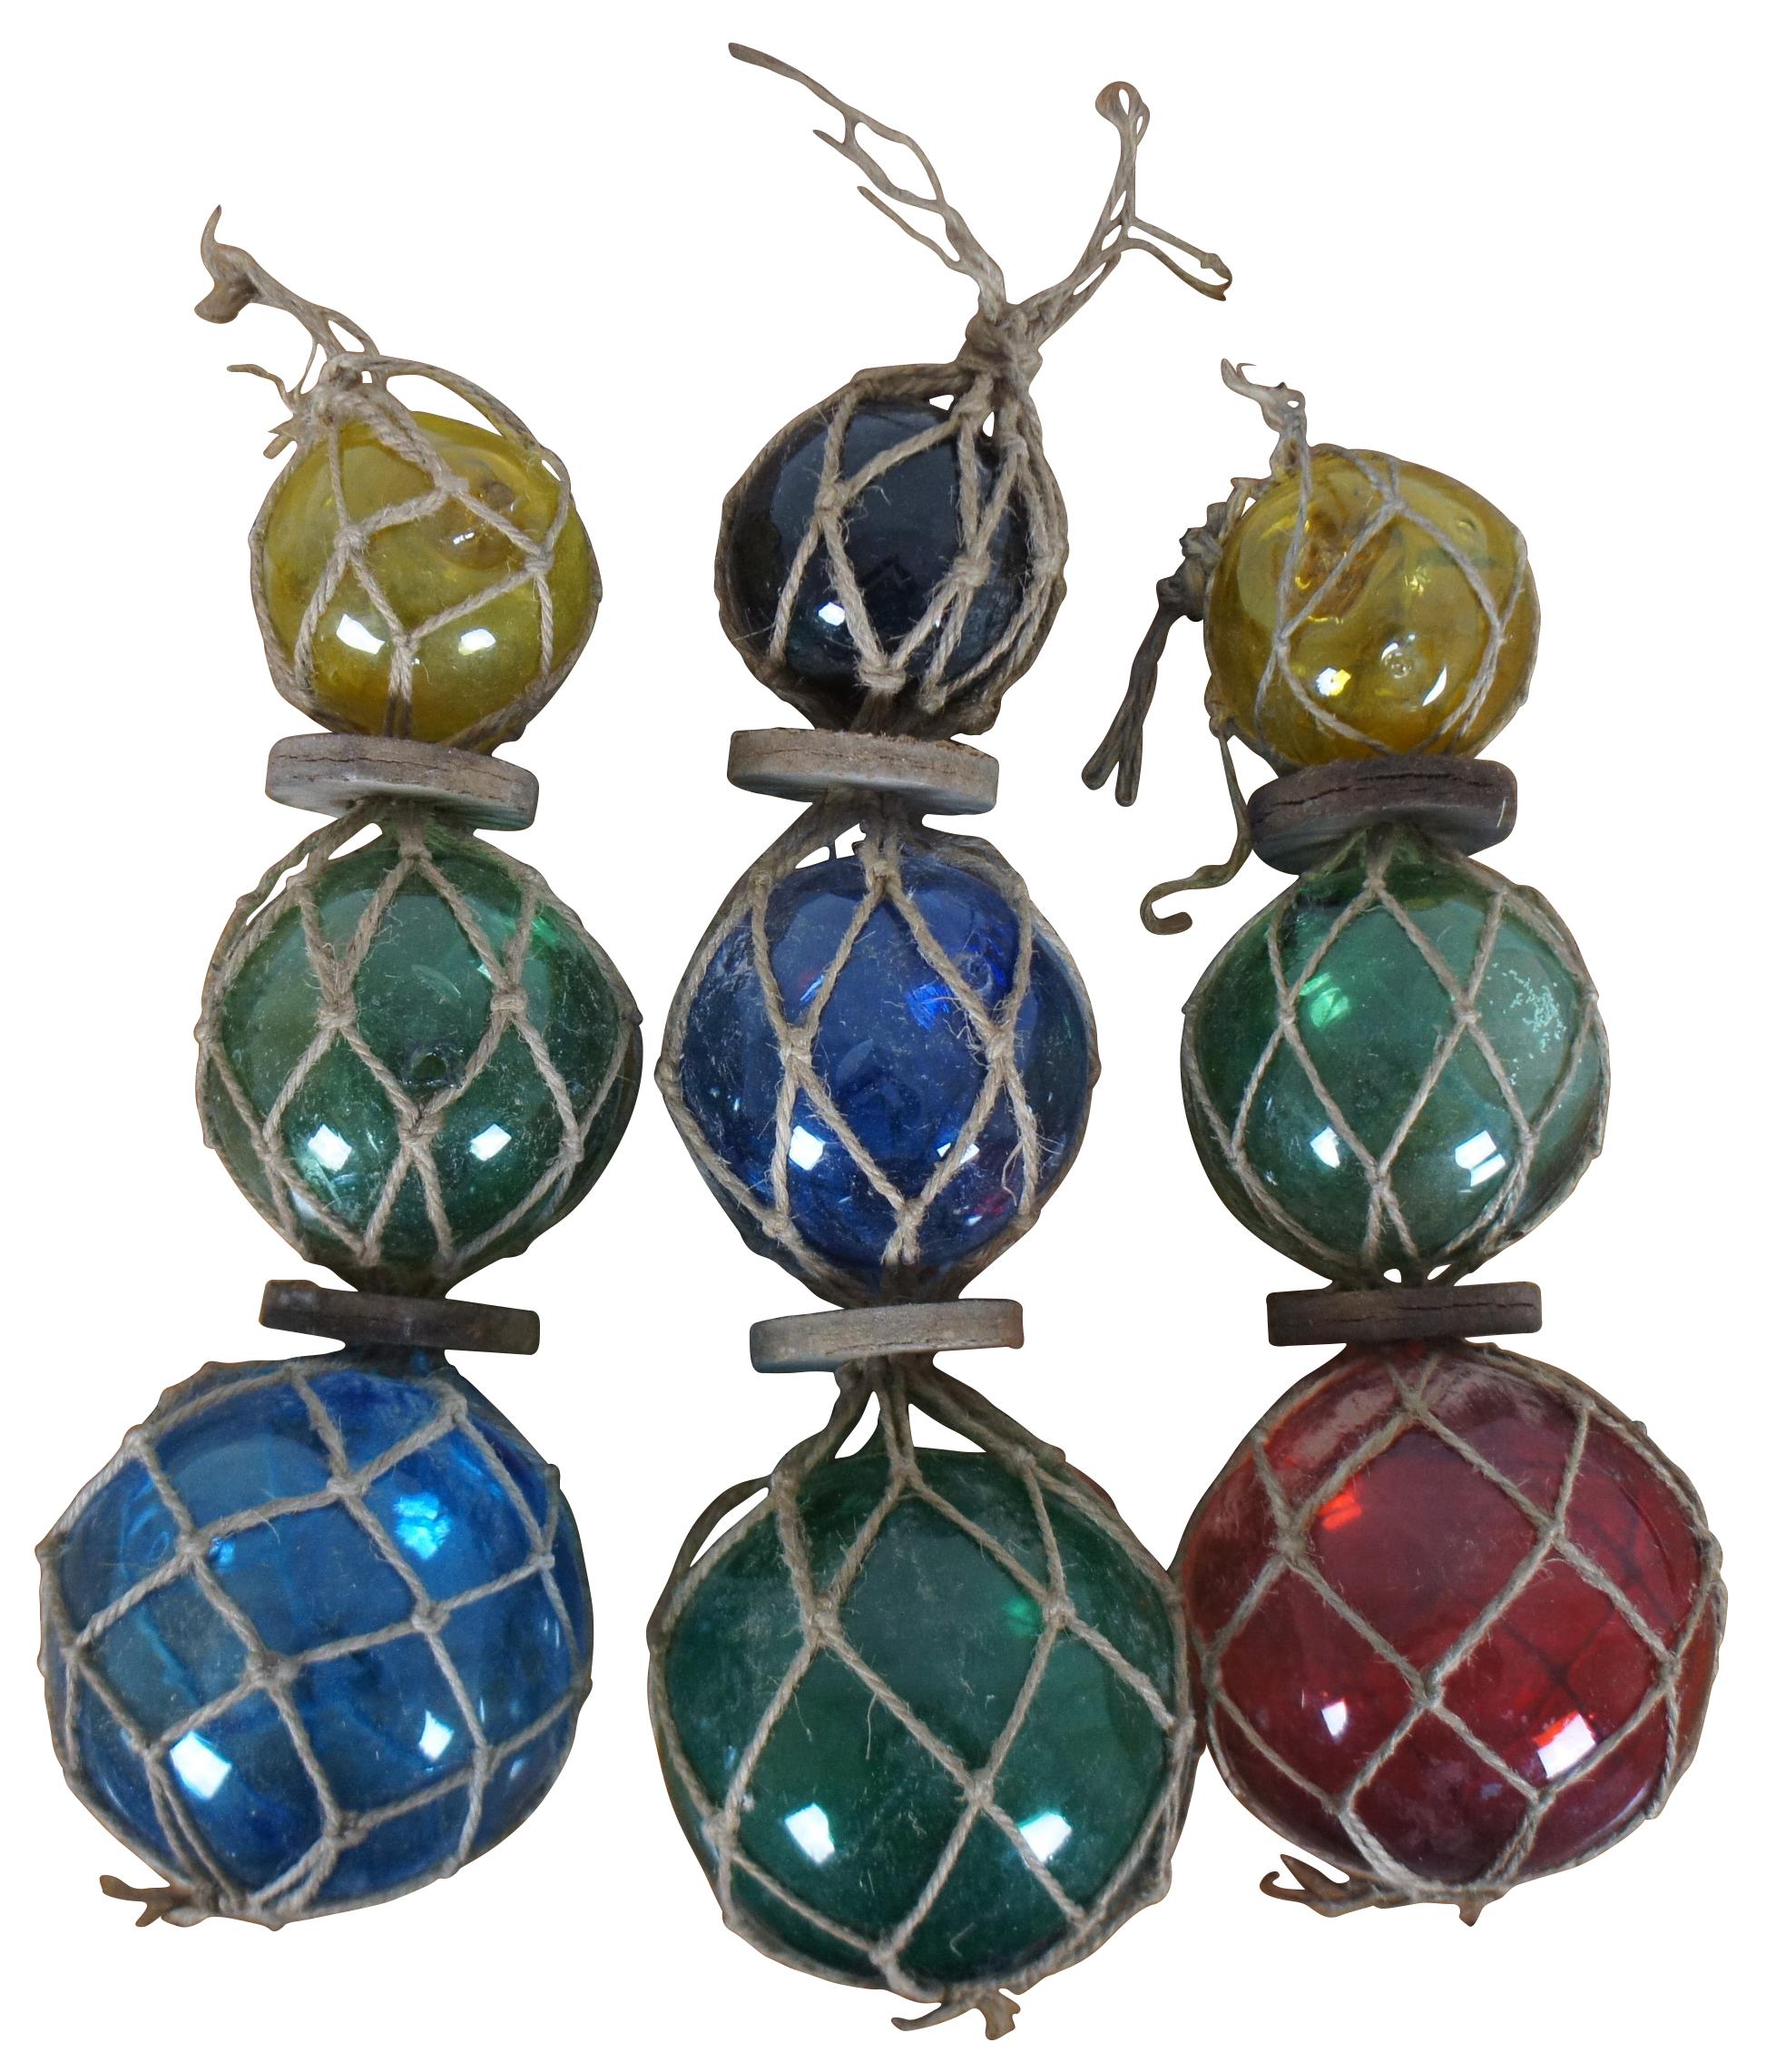 Set of three vintage Japanese hand blown glass fishing buoy floats, featuring red, green, blue, yellow and dark amber graduated glass orbs, divided by cardboard discs and suspended in jute netting.
